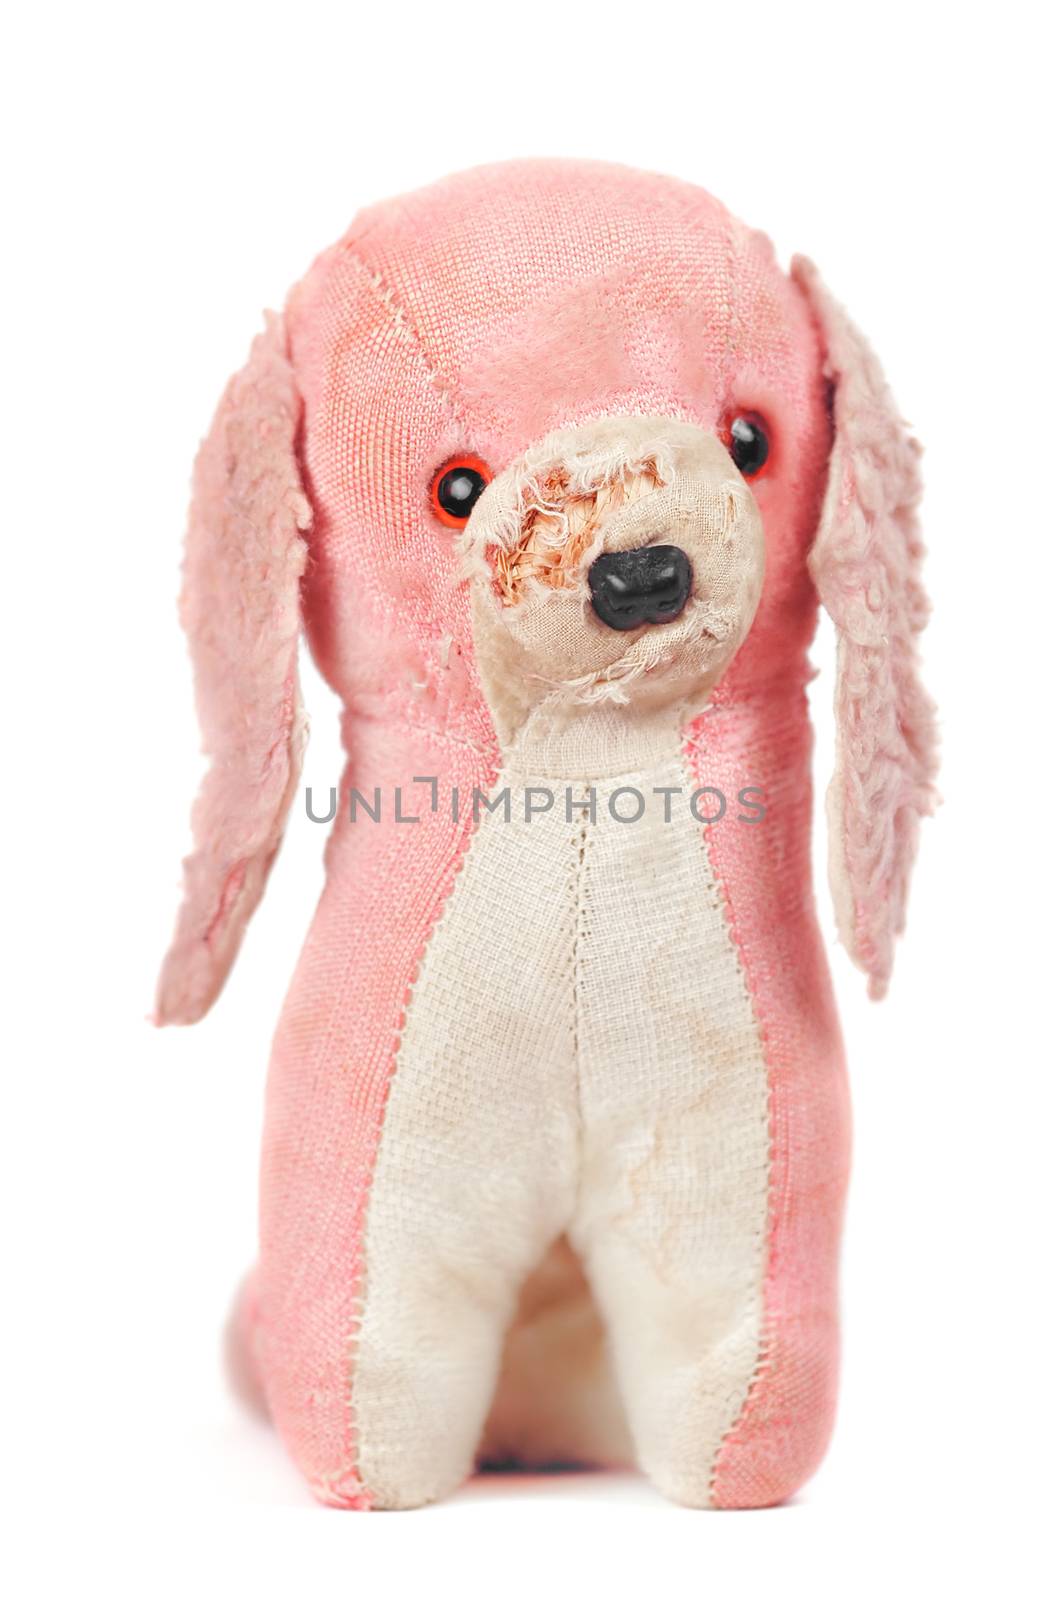 well loved stuffed toy dog, but could have conceptual uses for childhood themes